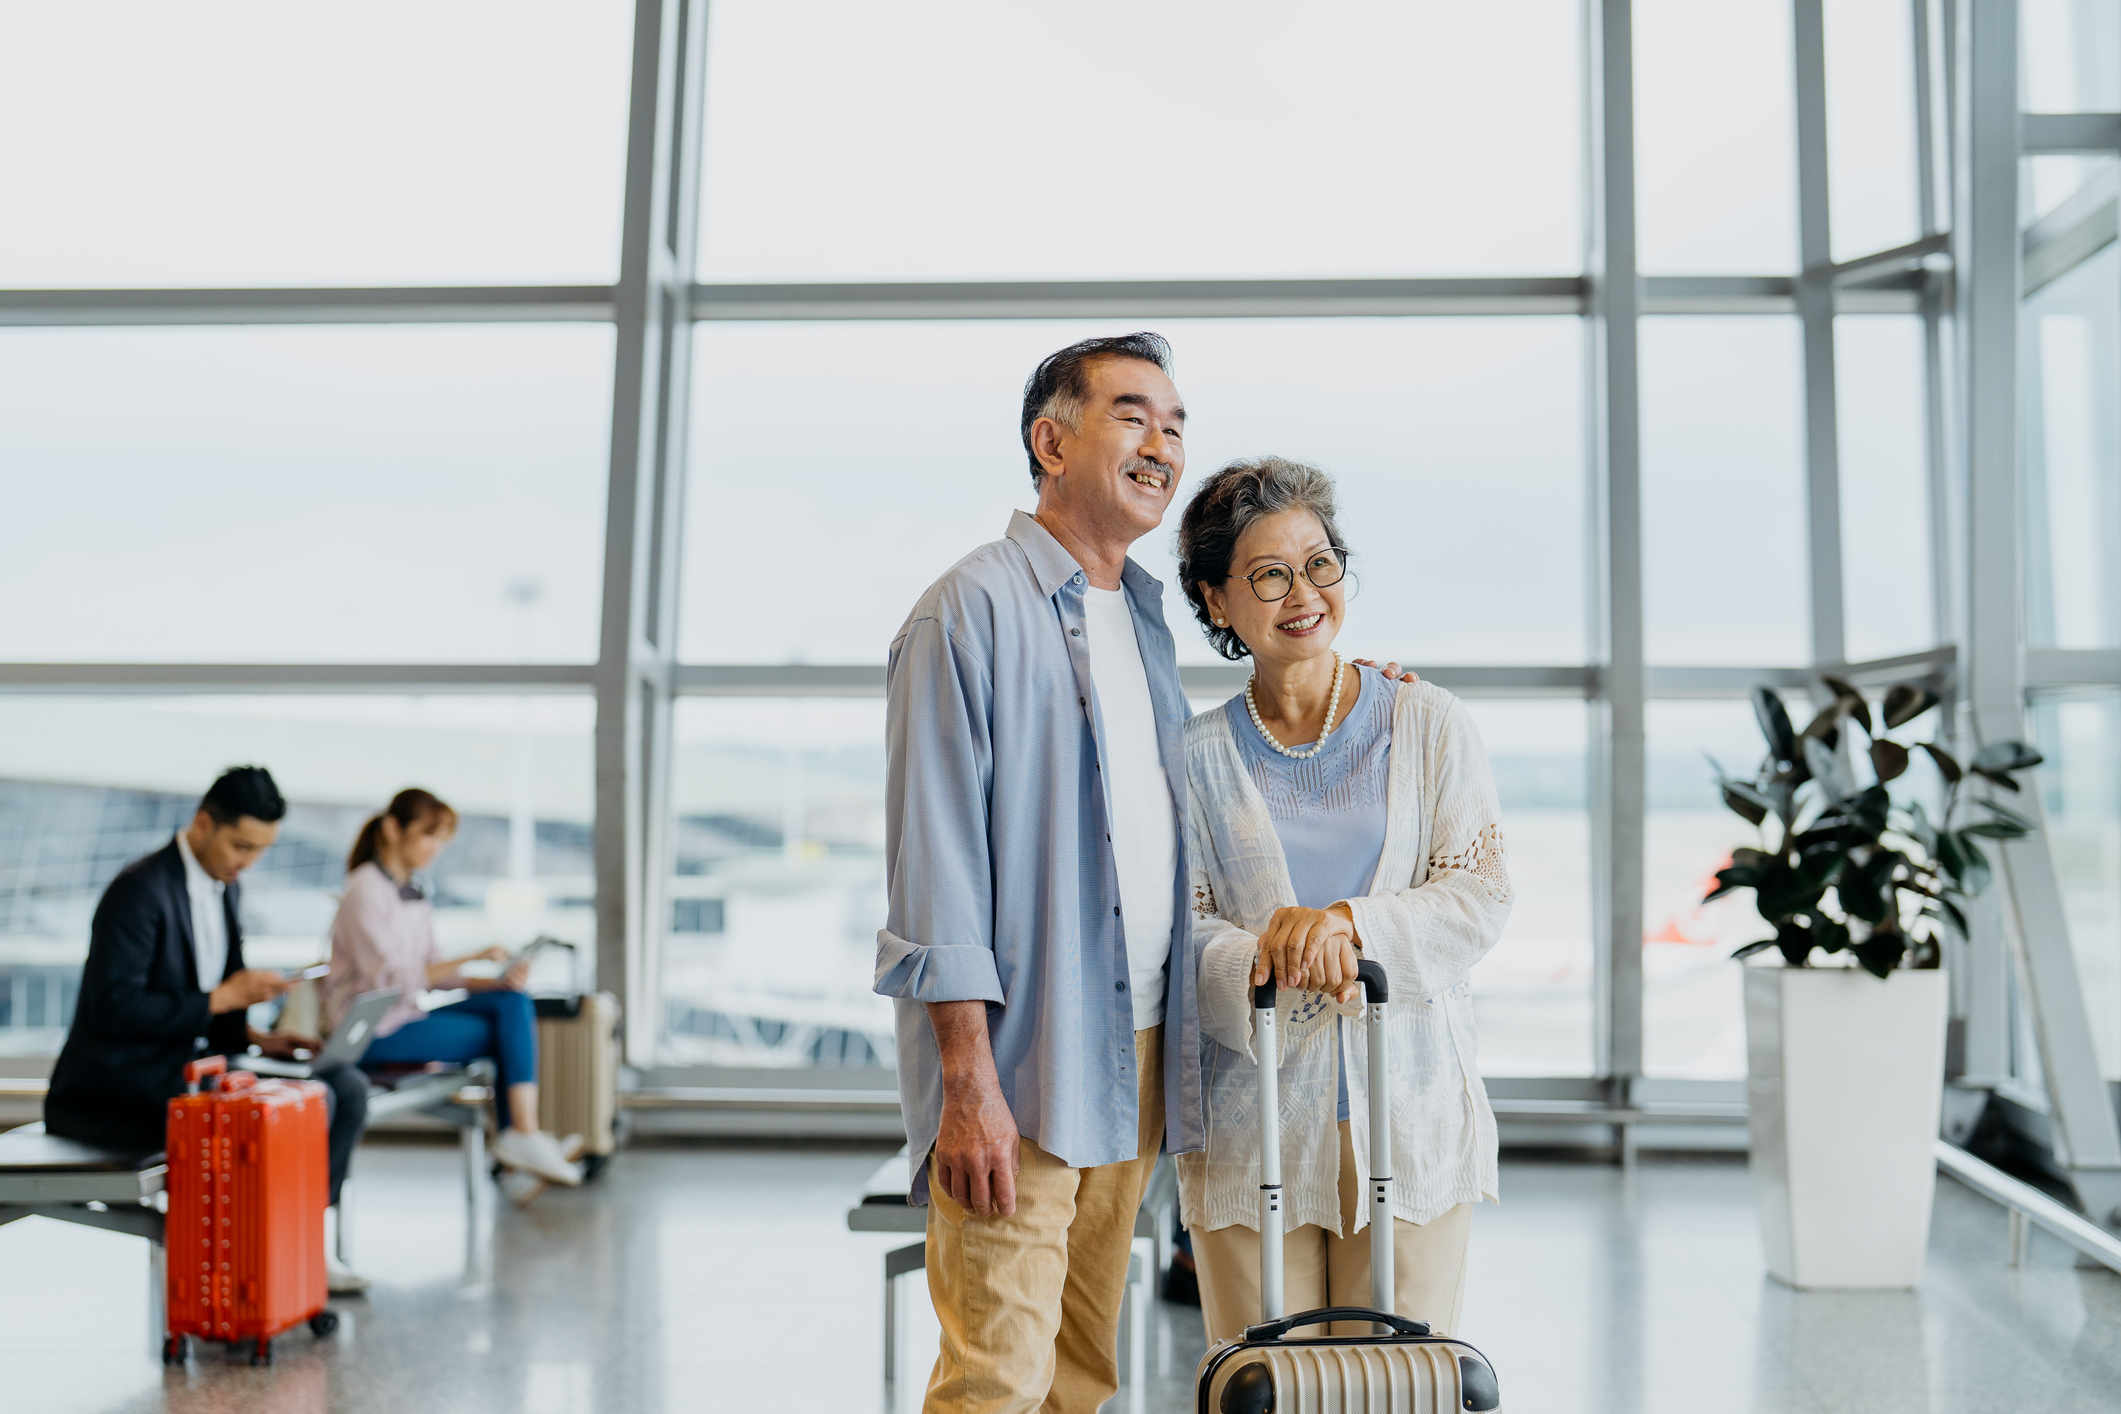 9 Essential Travel Tips for Older Adults